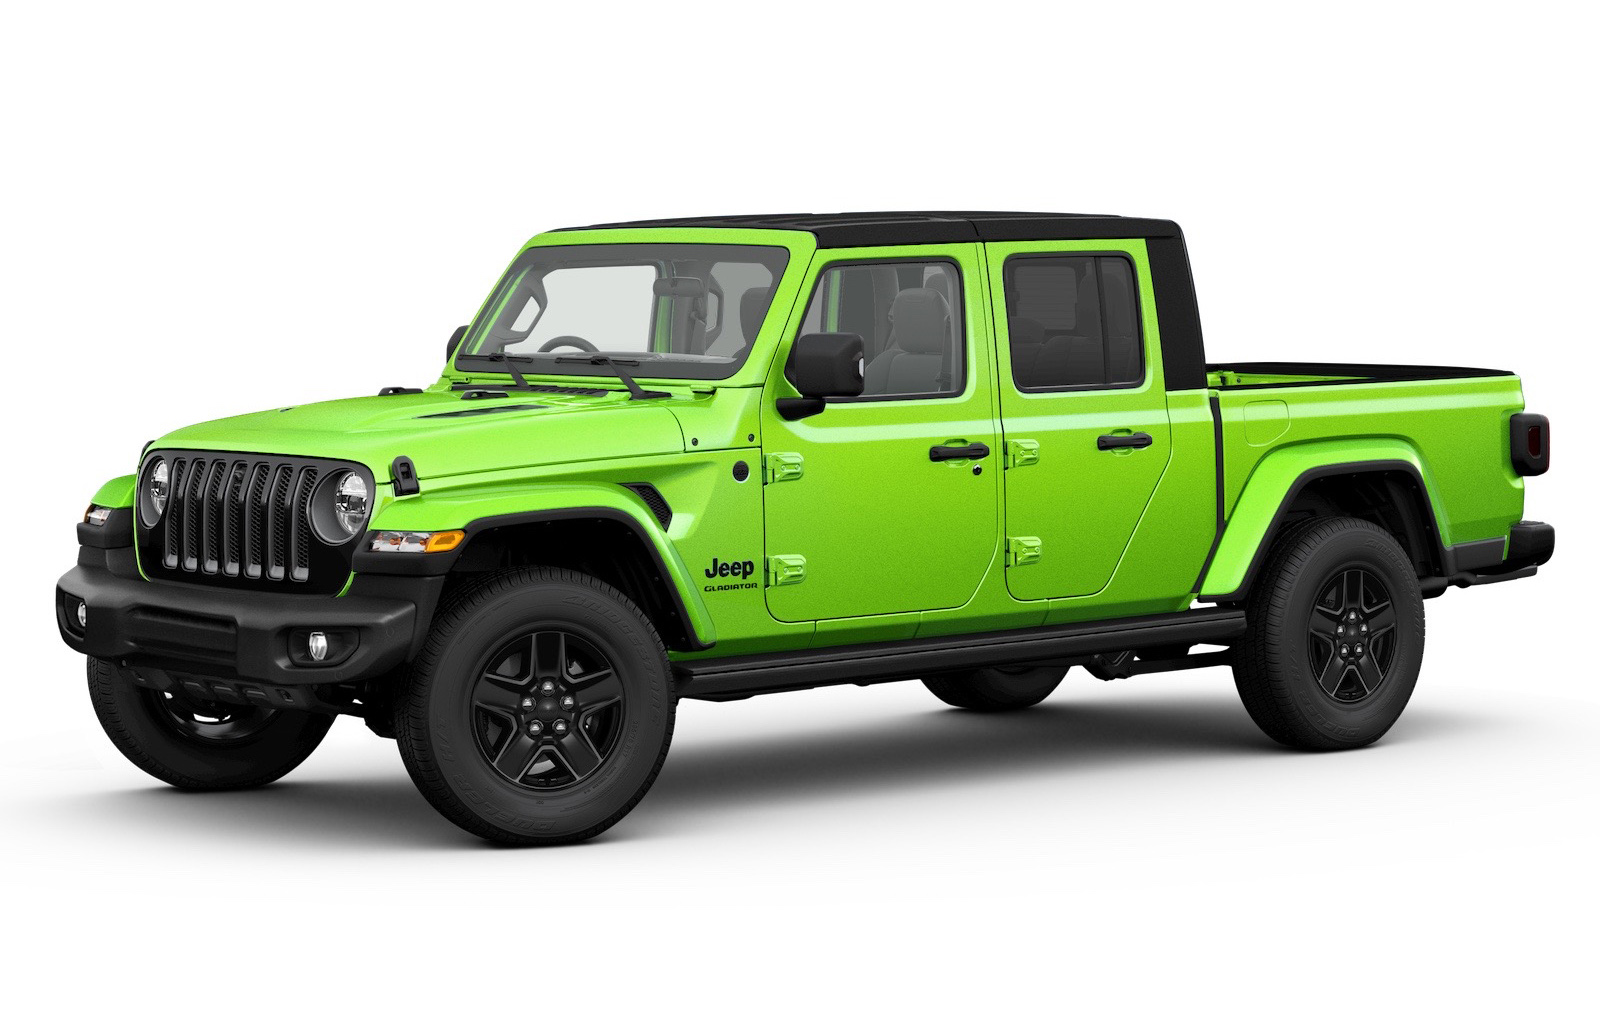 2021 Jeep Gladiator update announced, increased payload capacity